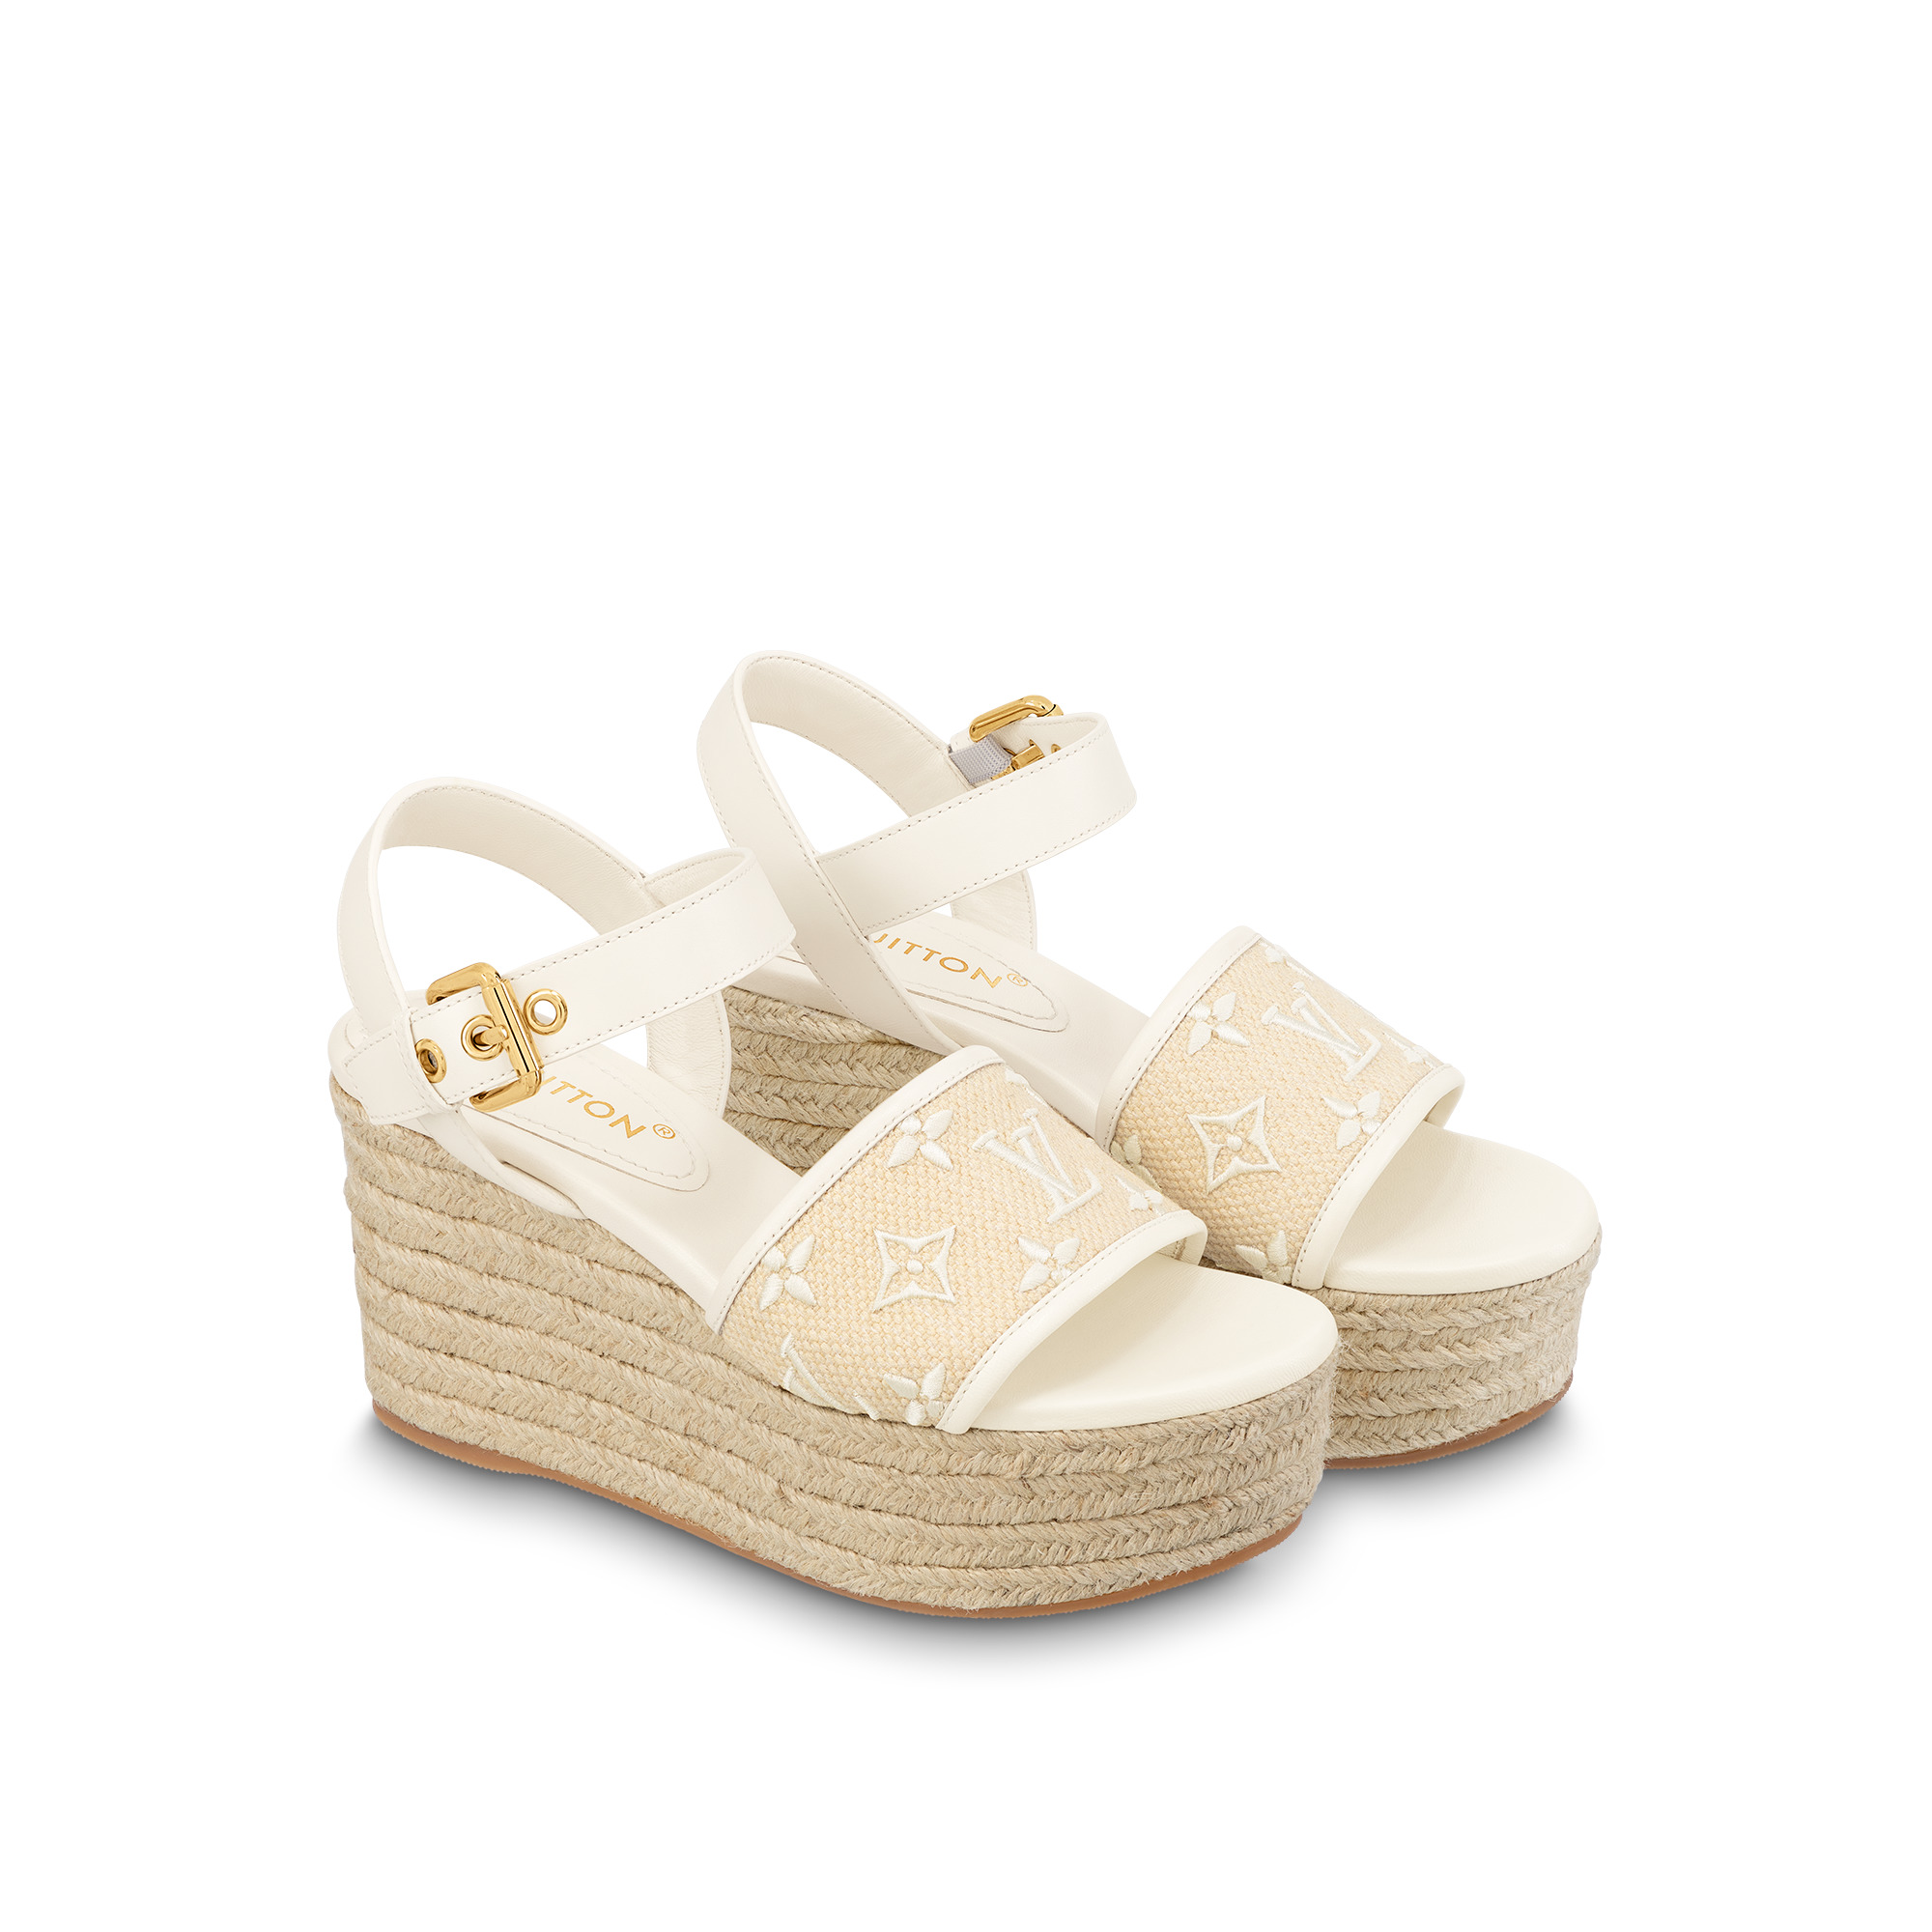 Starboard Wedge Sandals - Shoes 1AB36M